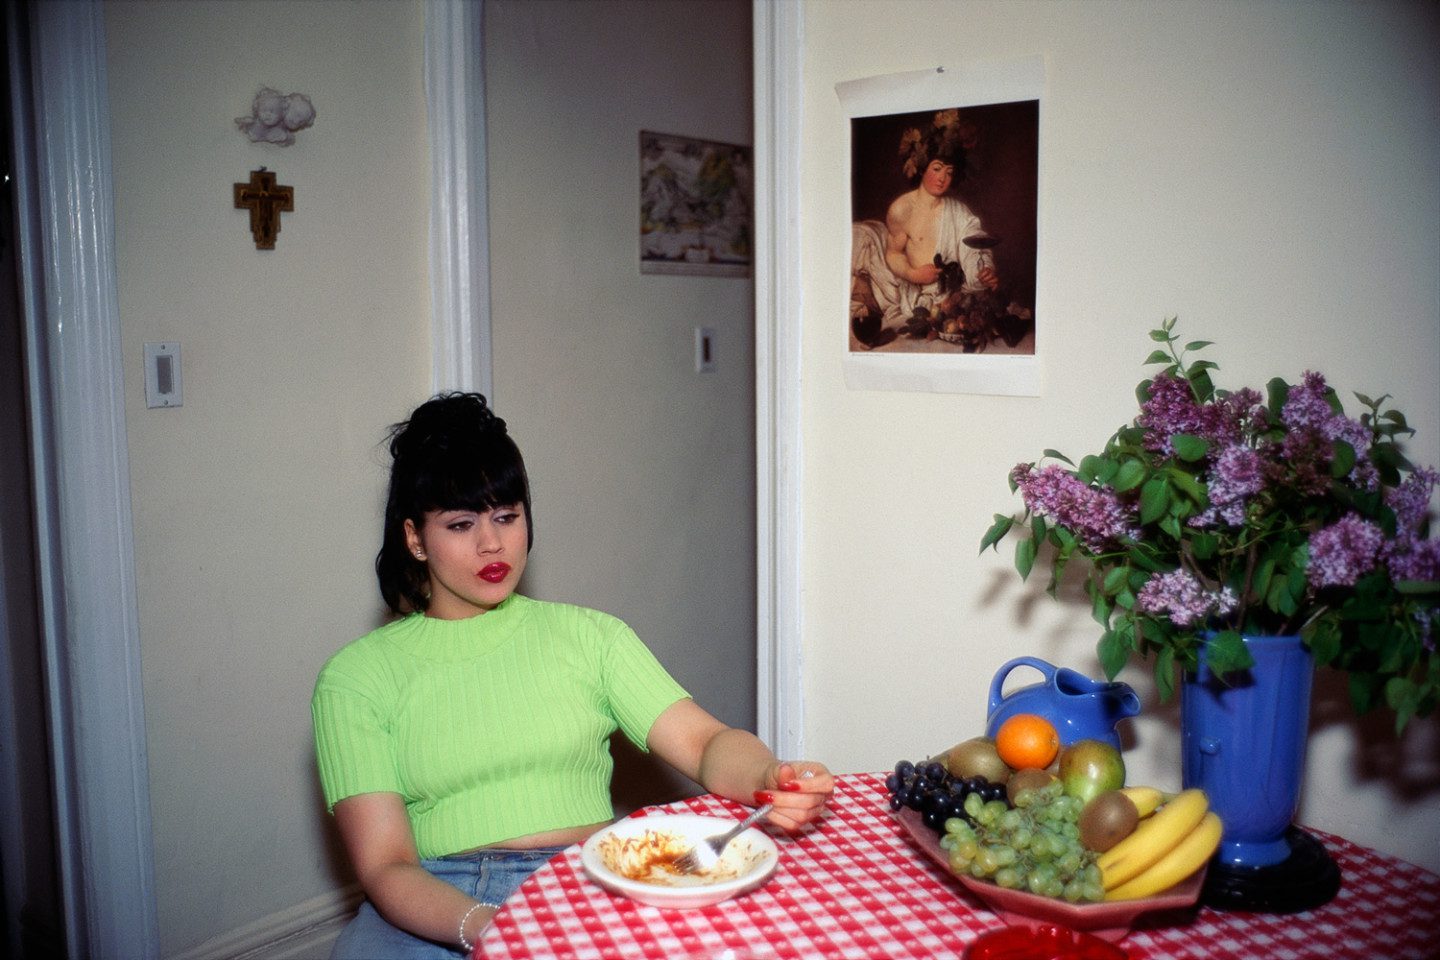 A woman at a kitchen table